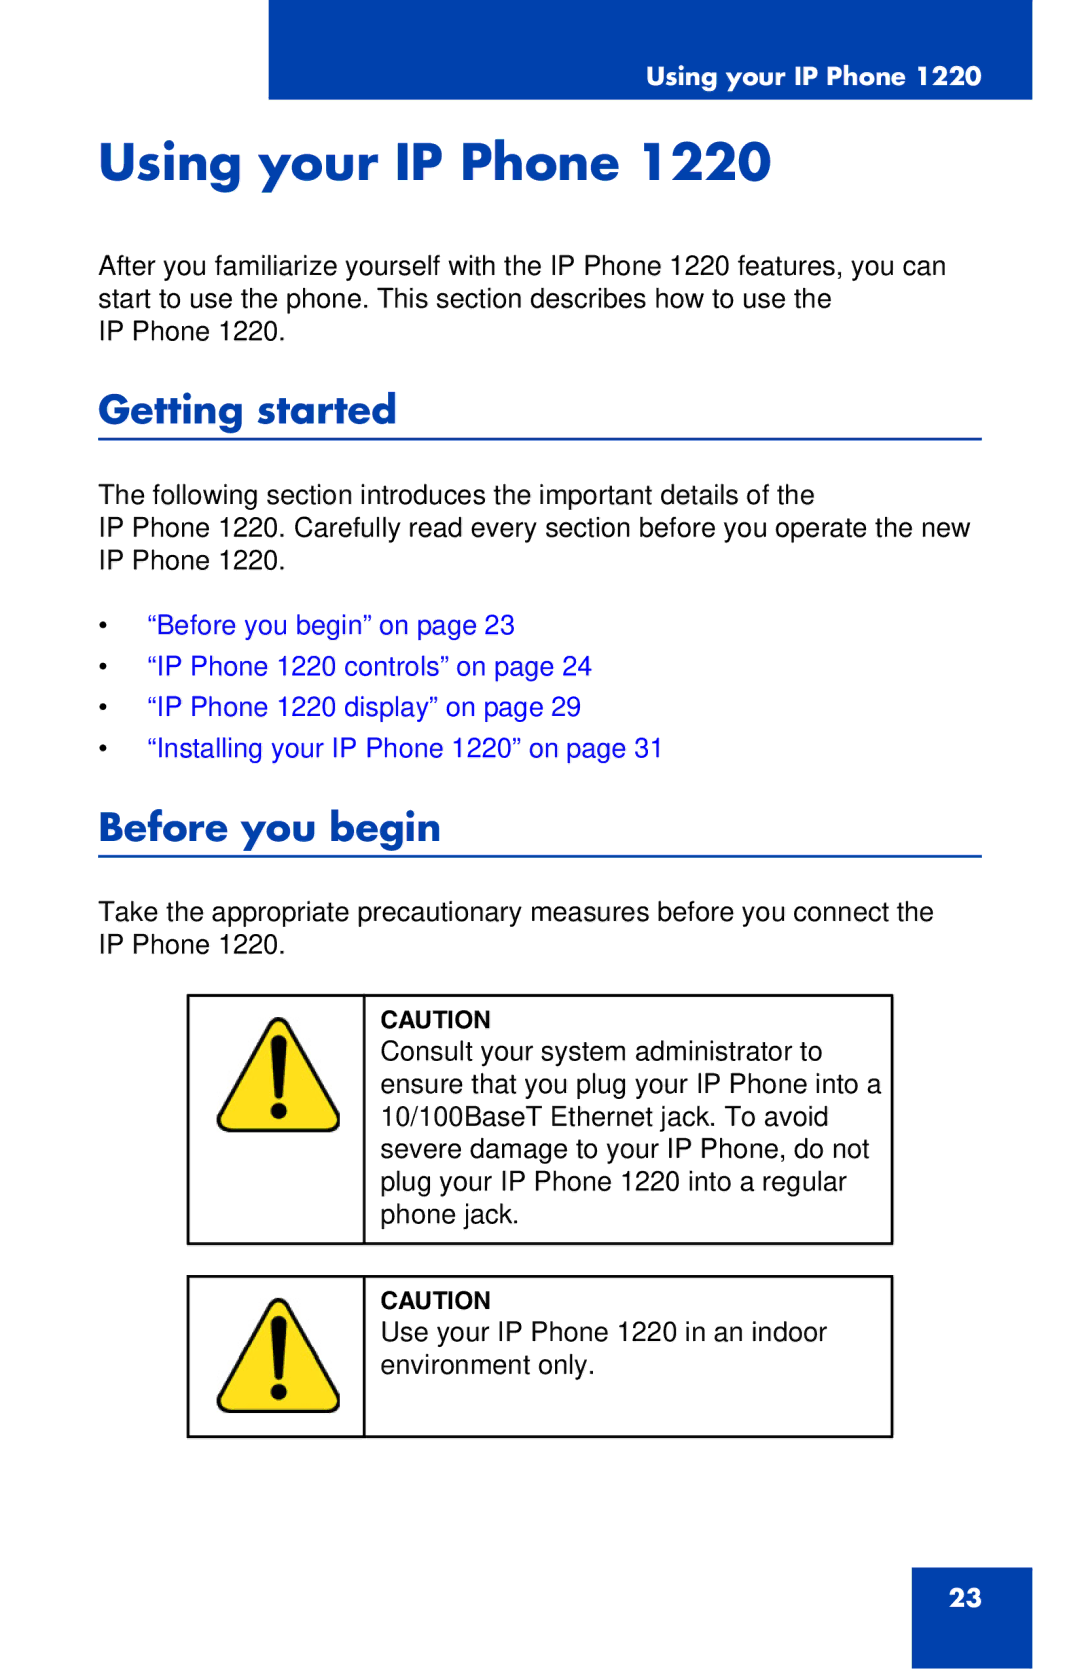 Nortel Networks IP Phone 1220 manual Using your IP Phone, Getting started, Before you begin 